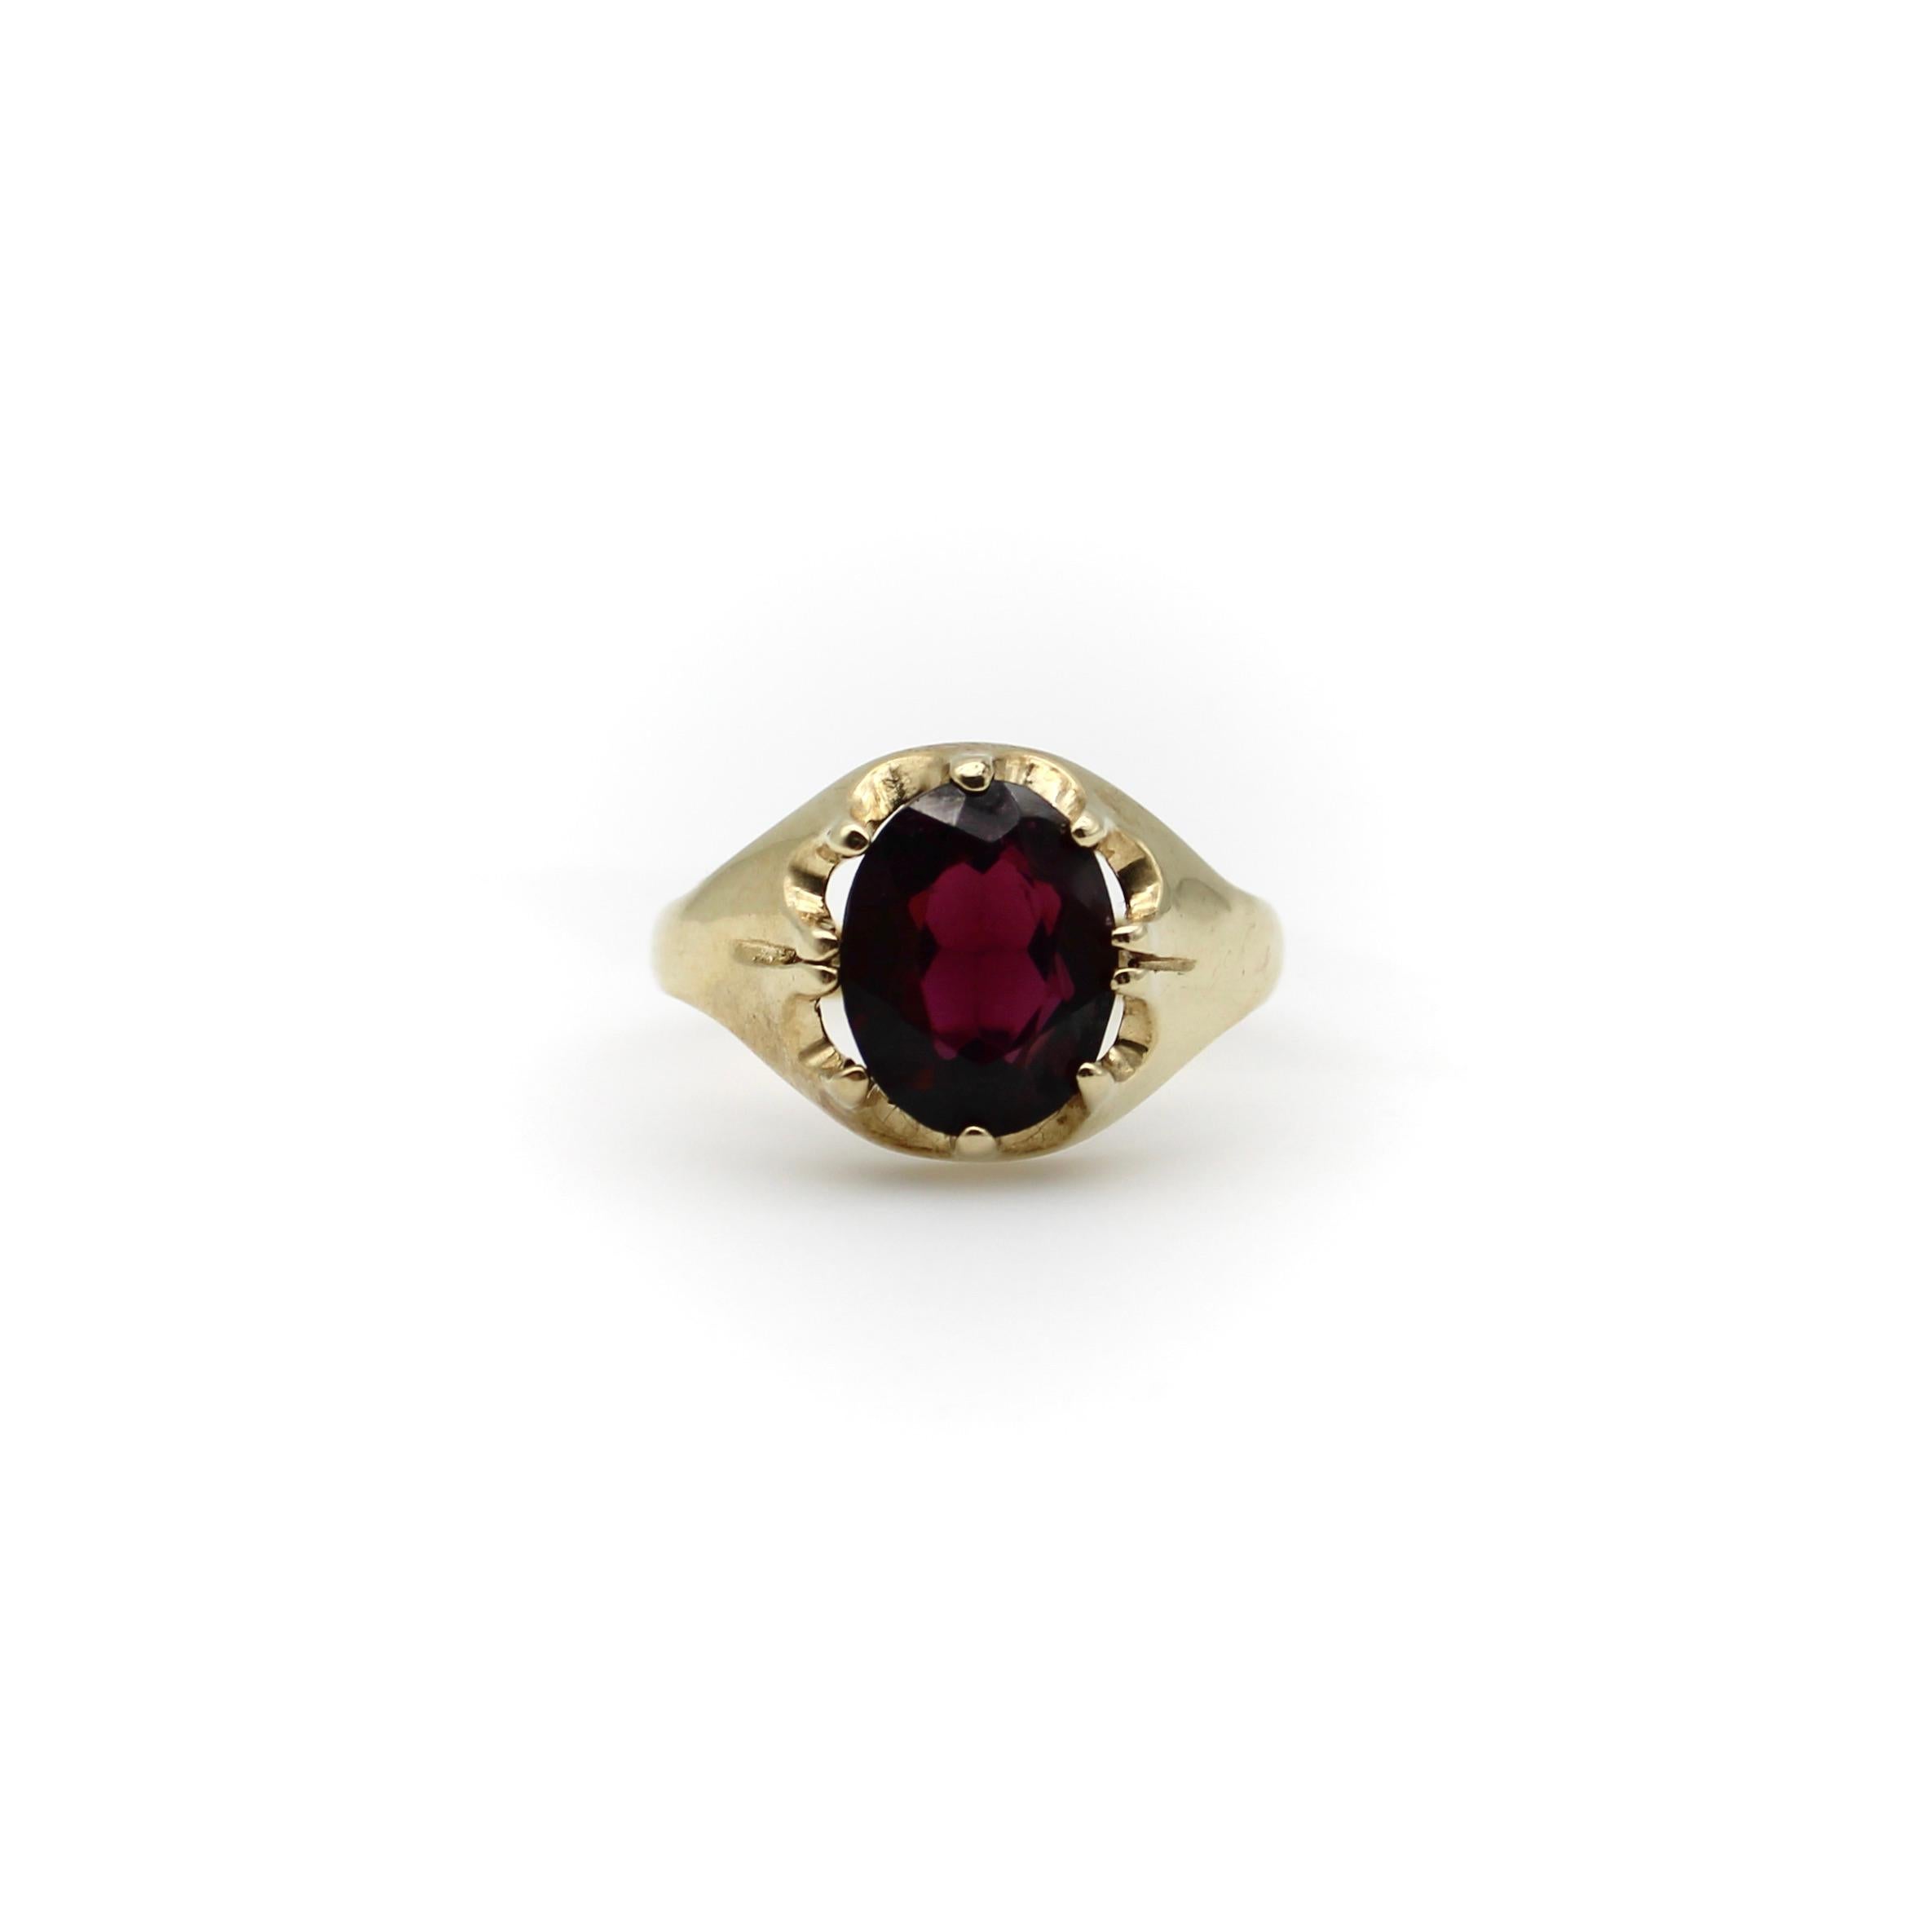 This is a lovely 9K gold and rhodolite garnet ring. The ring is well marked—it contains the makers mark, the mark for London and the date letter for 1994. This ring was made by the Berker Brothers. The Berker Brothers is a family run business that